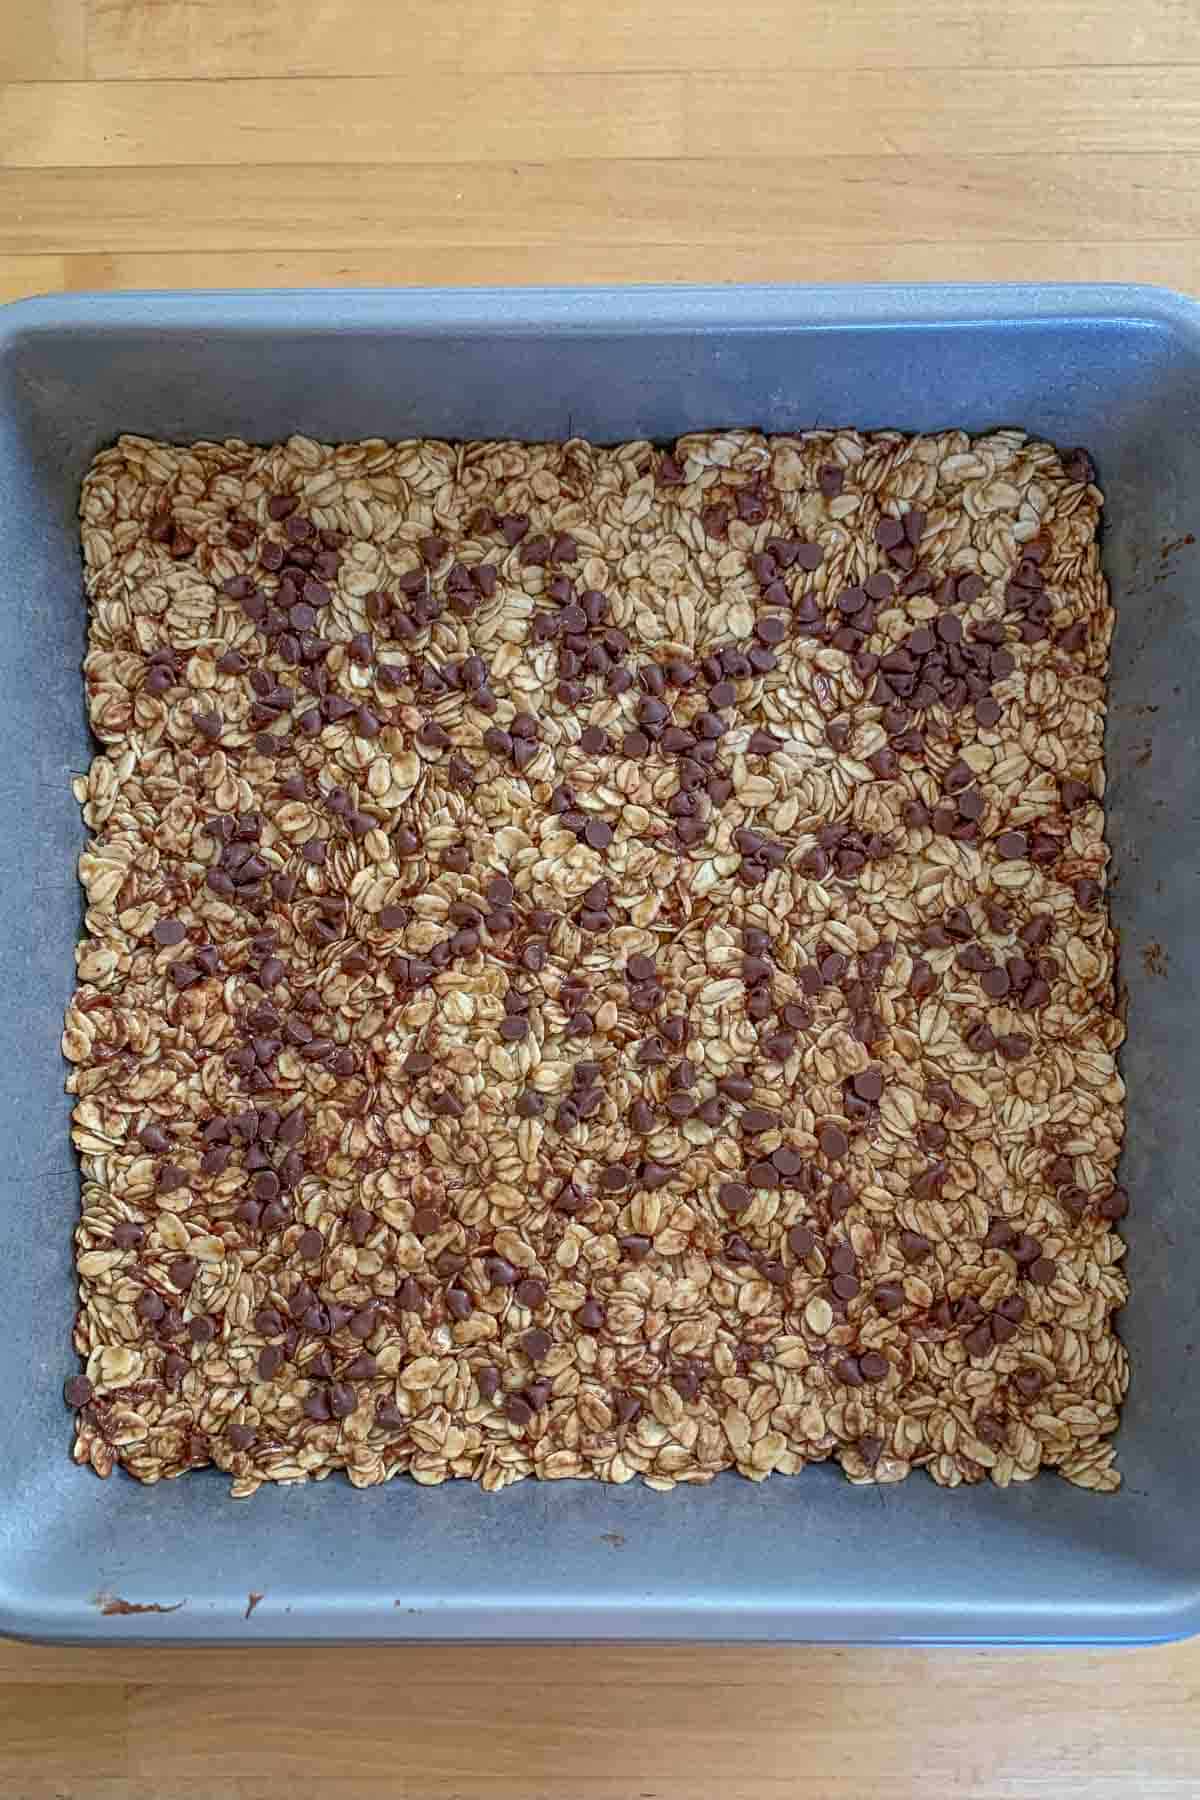 finished chocolate chip granola bars in pan